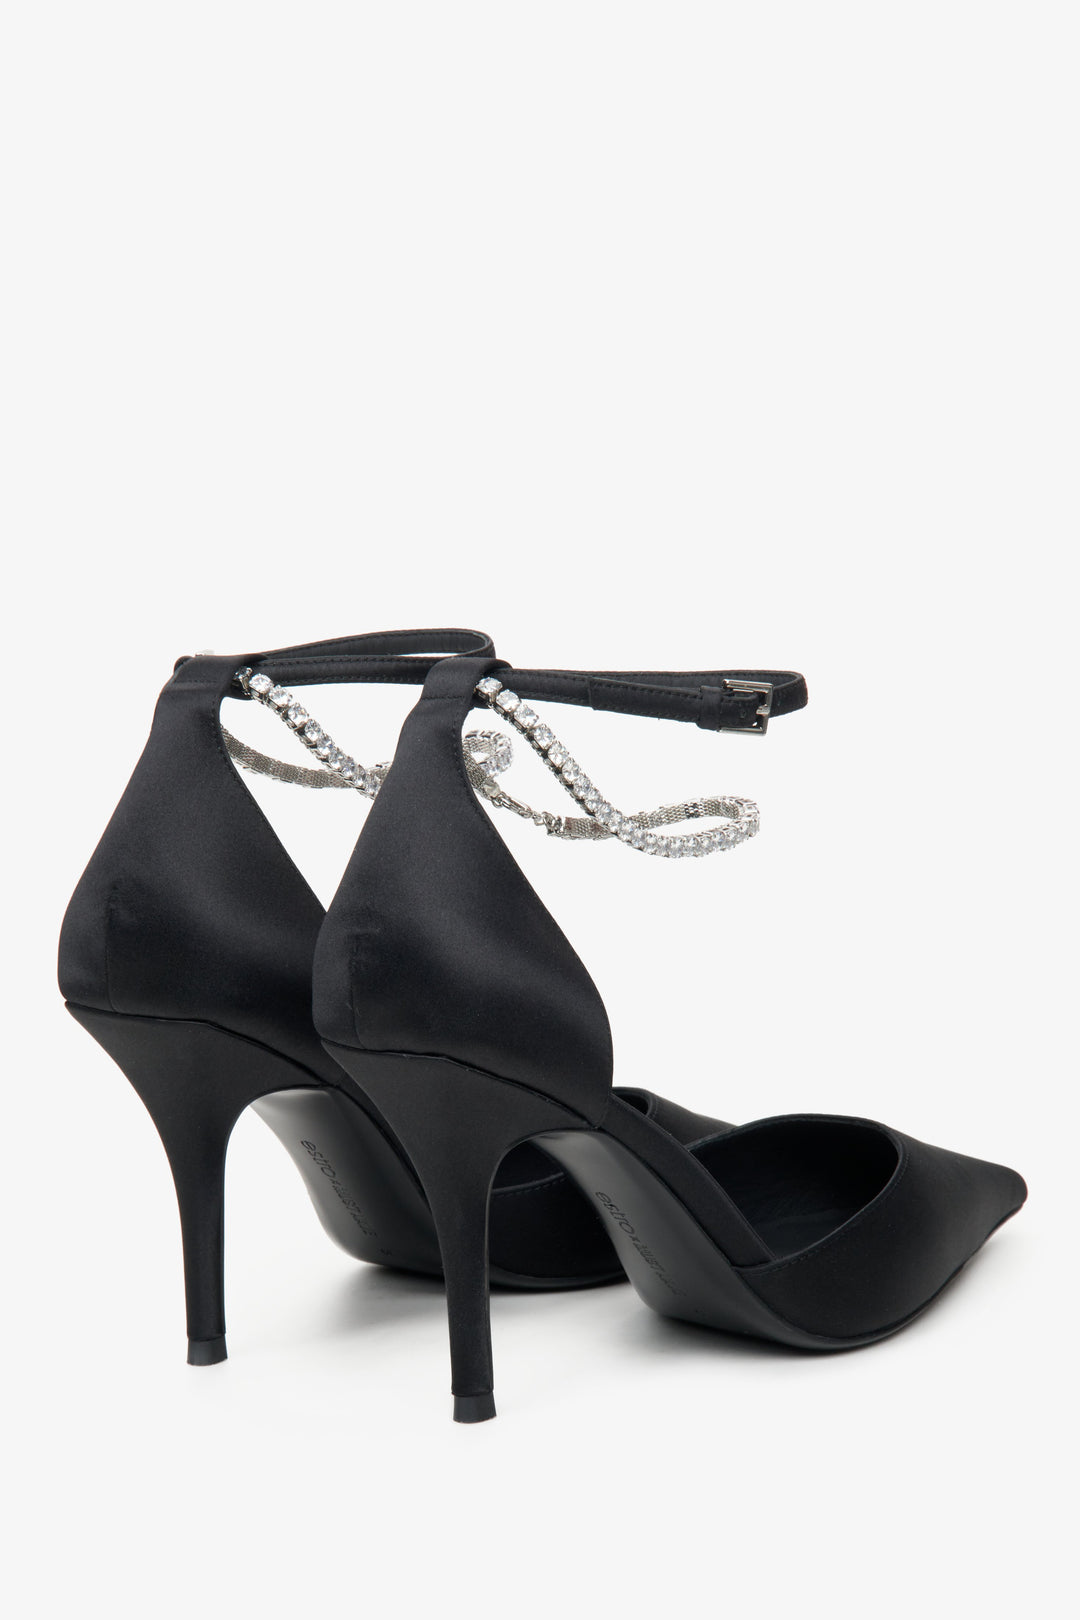 Elegant women's black pumps by Estro x MustHave - close-up on the heel.